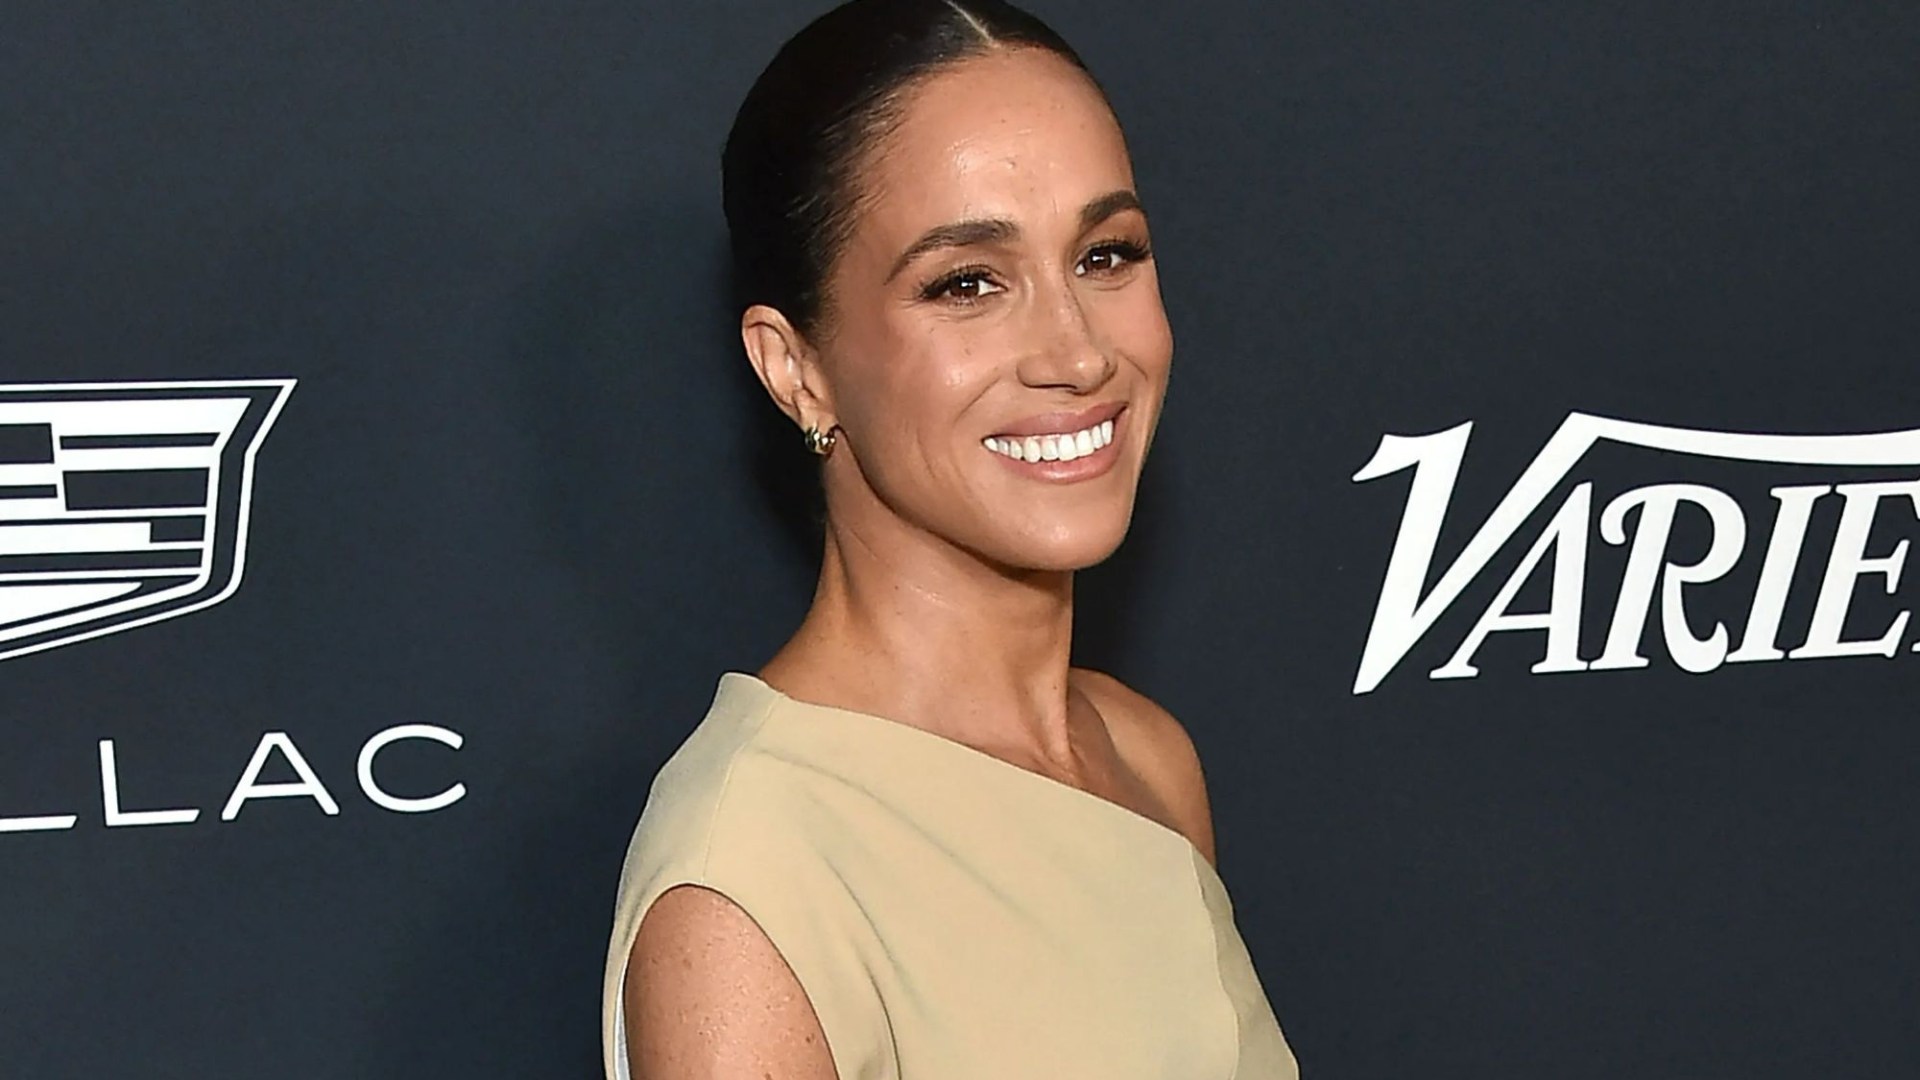 Meghan Markle’s Suits Spinoff Role Offer Is the Biggest TV Deal of the Year – Join the Cast Now!